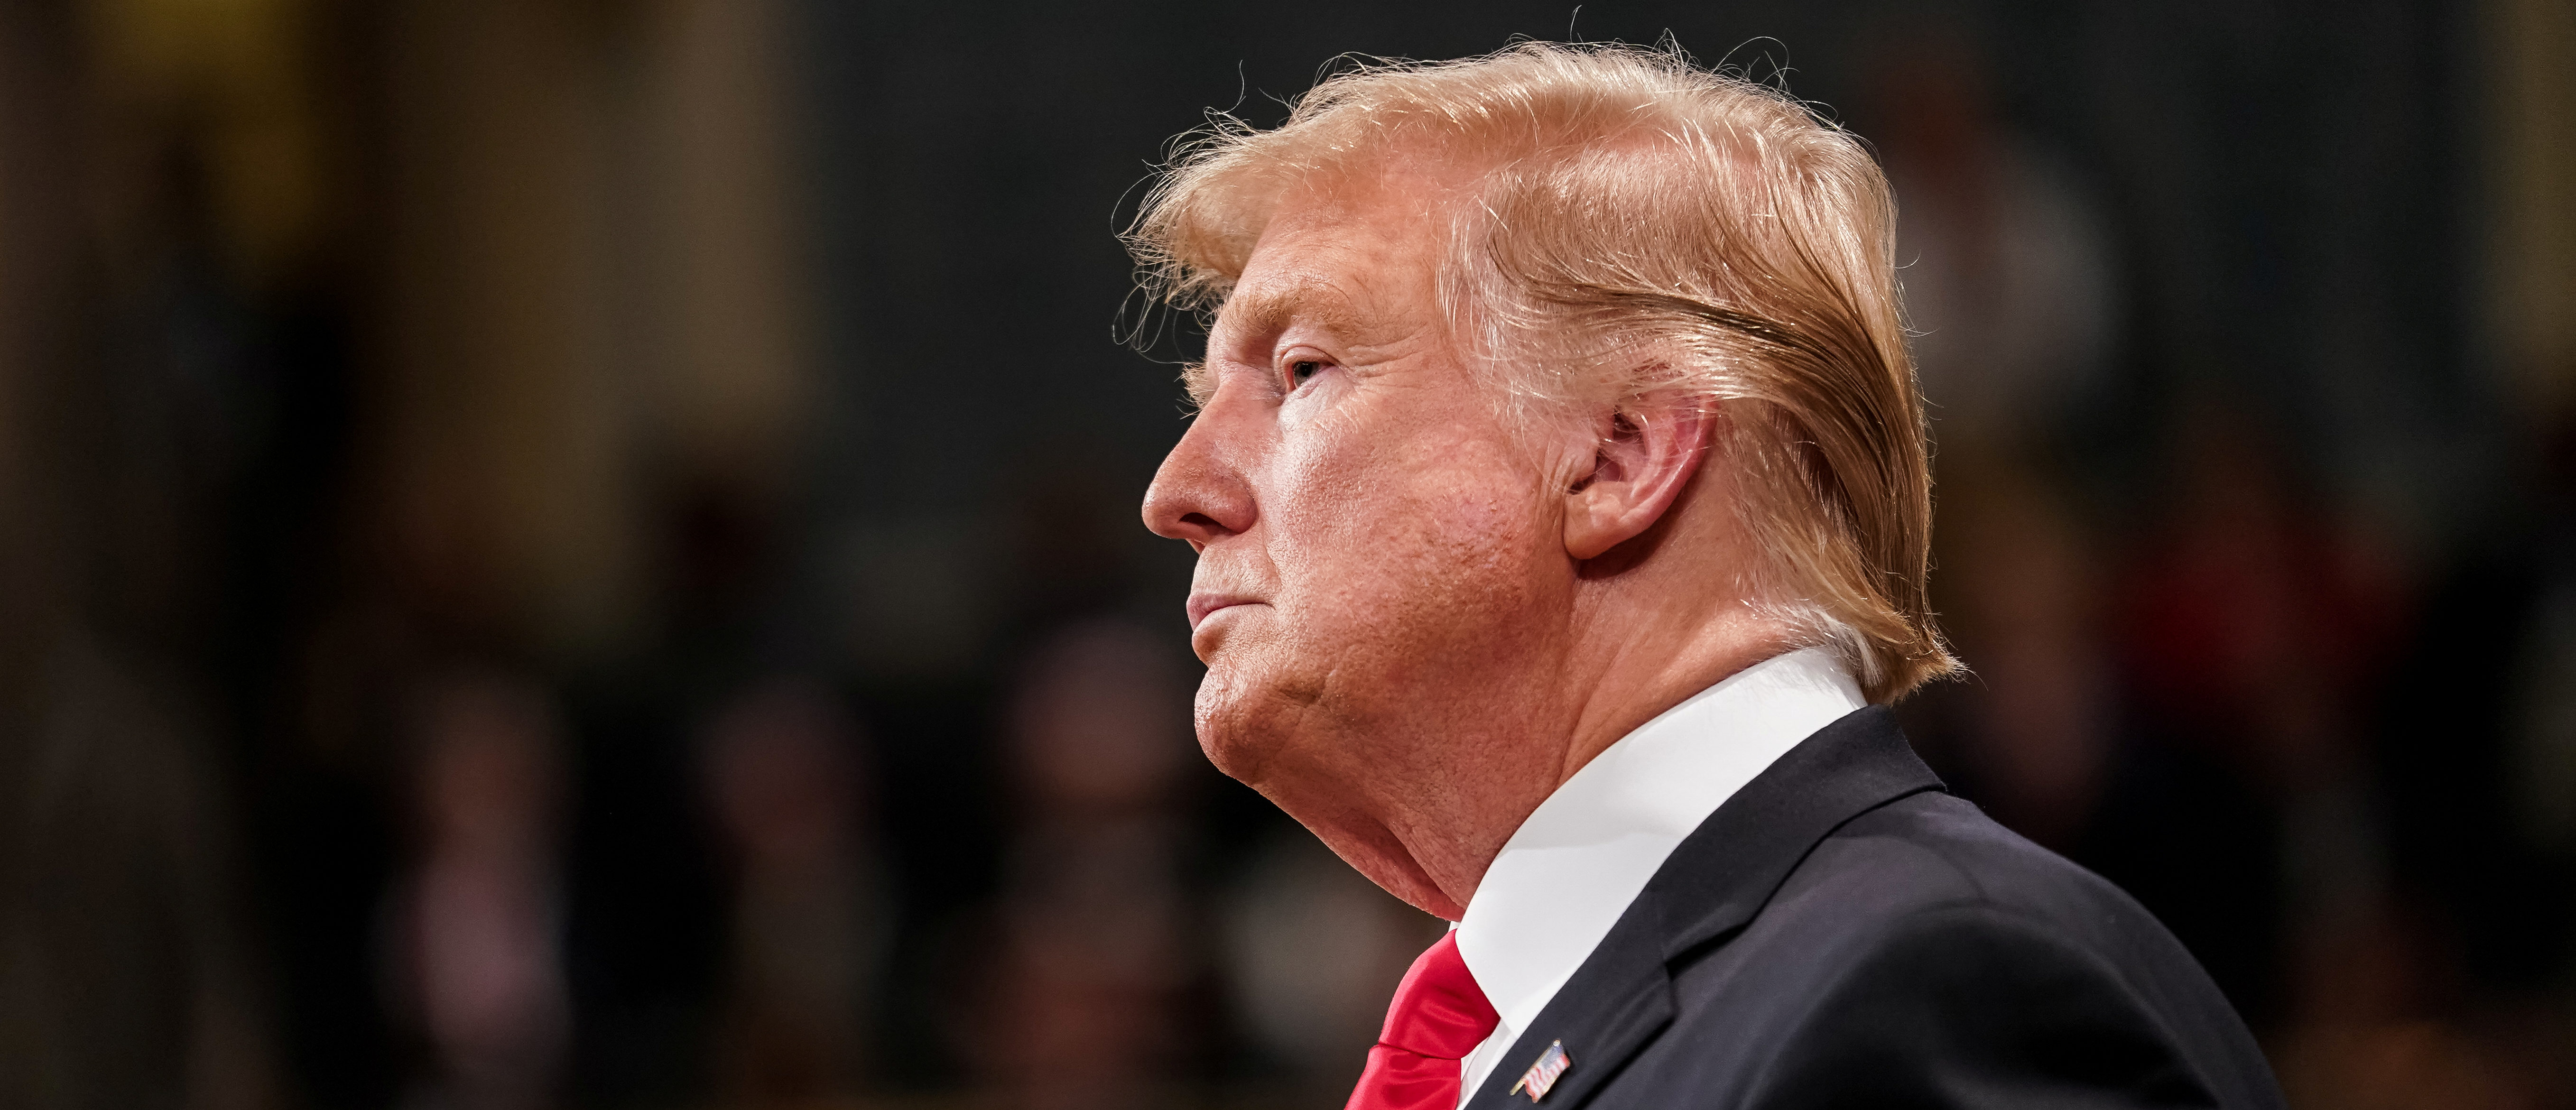 FEBRUARY 5, 2019 - WASHINGTON, DC: President Donald Trump delivered the State of the Union address at the Capitol in Washington, DC on February 5, 2019. Doug Mills/Pool via REUTERS